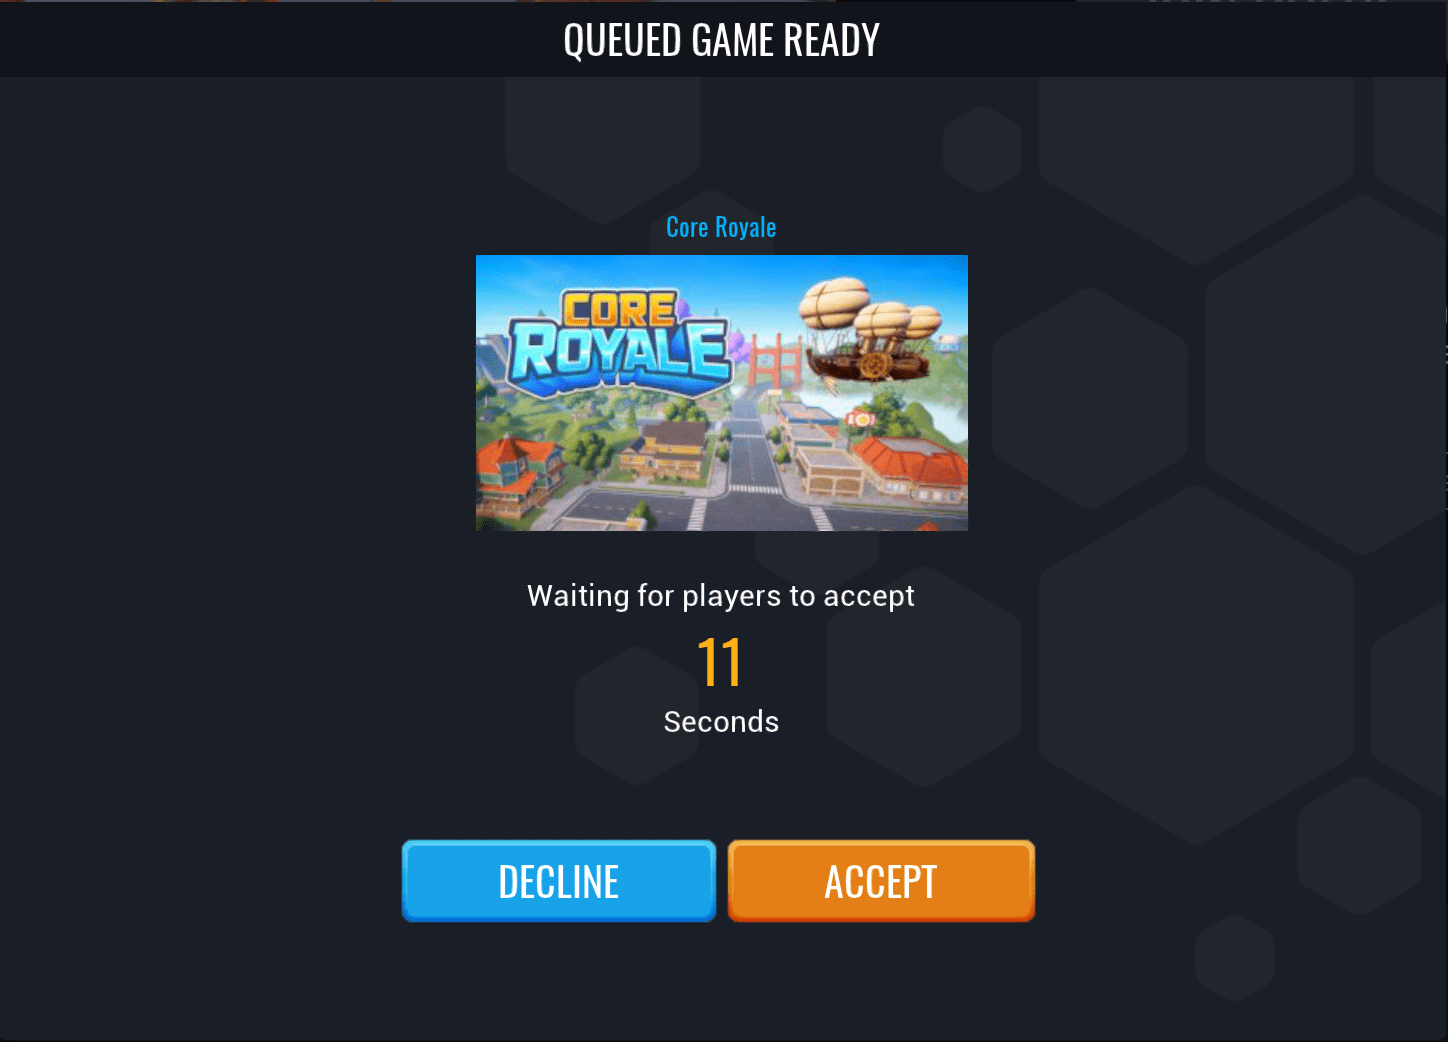 Queued Game Ready pop-up